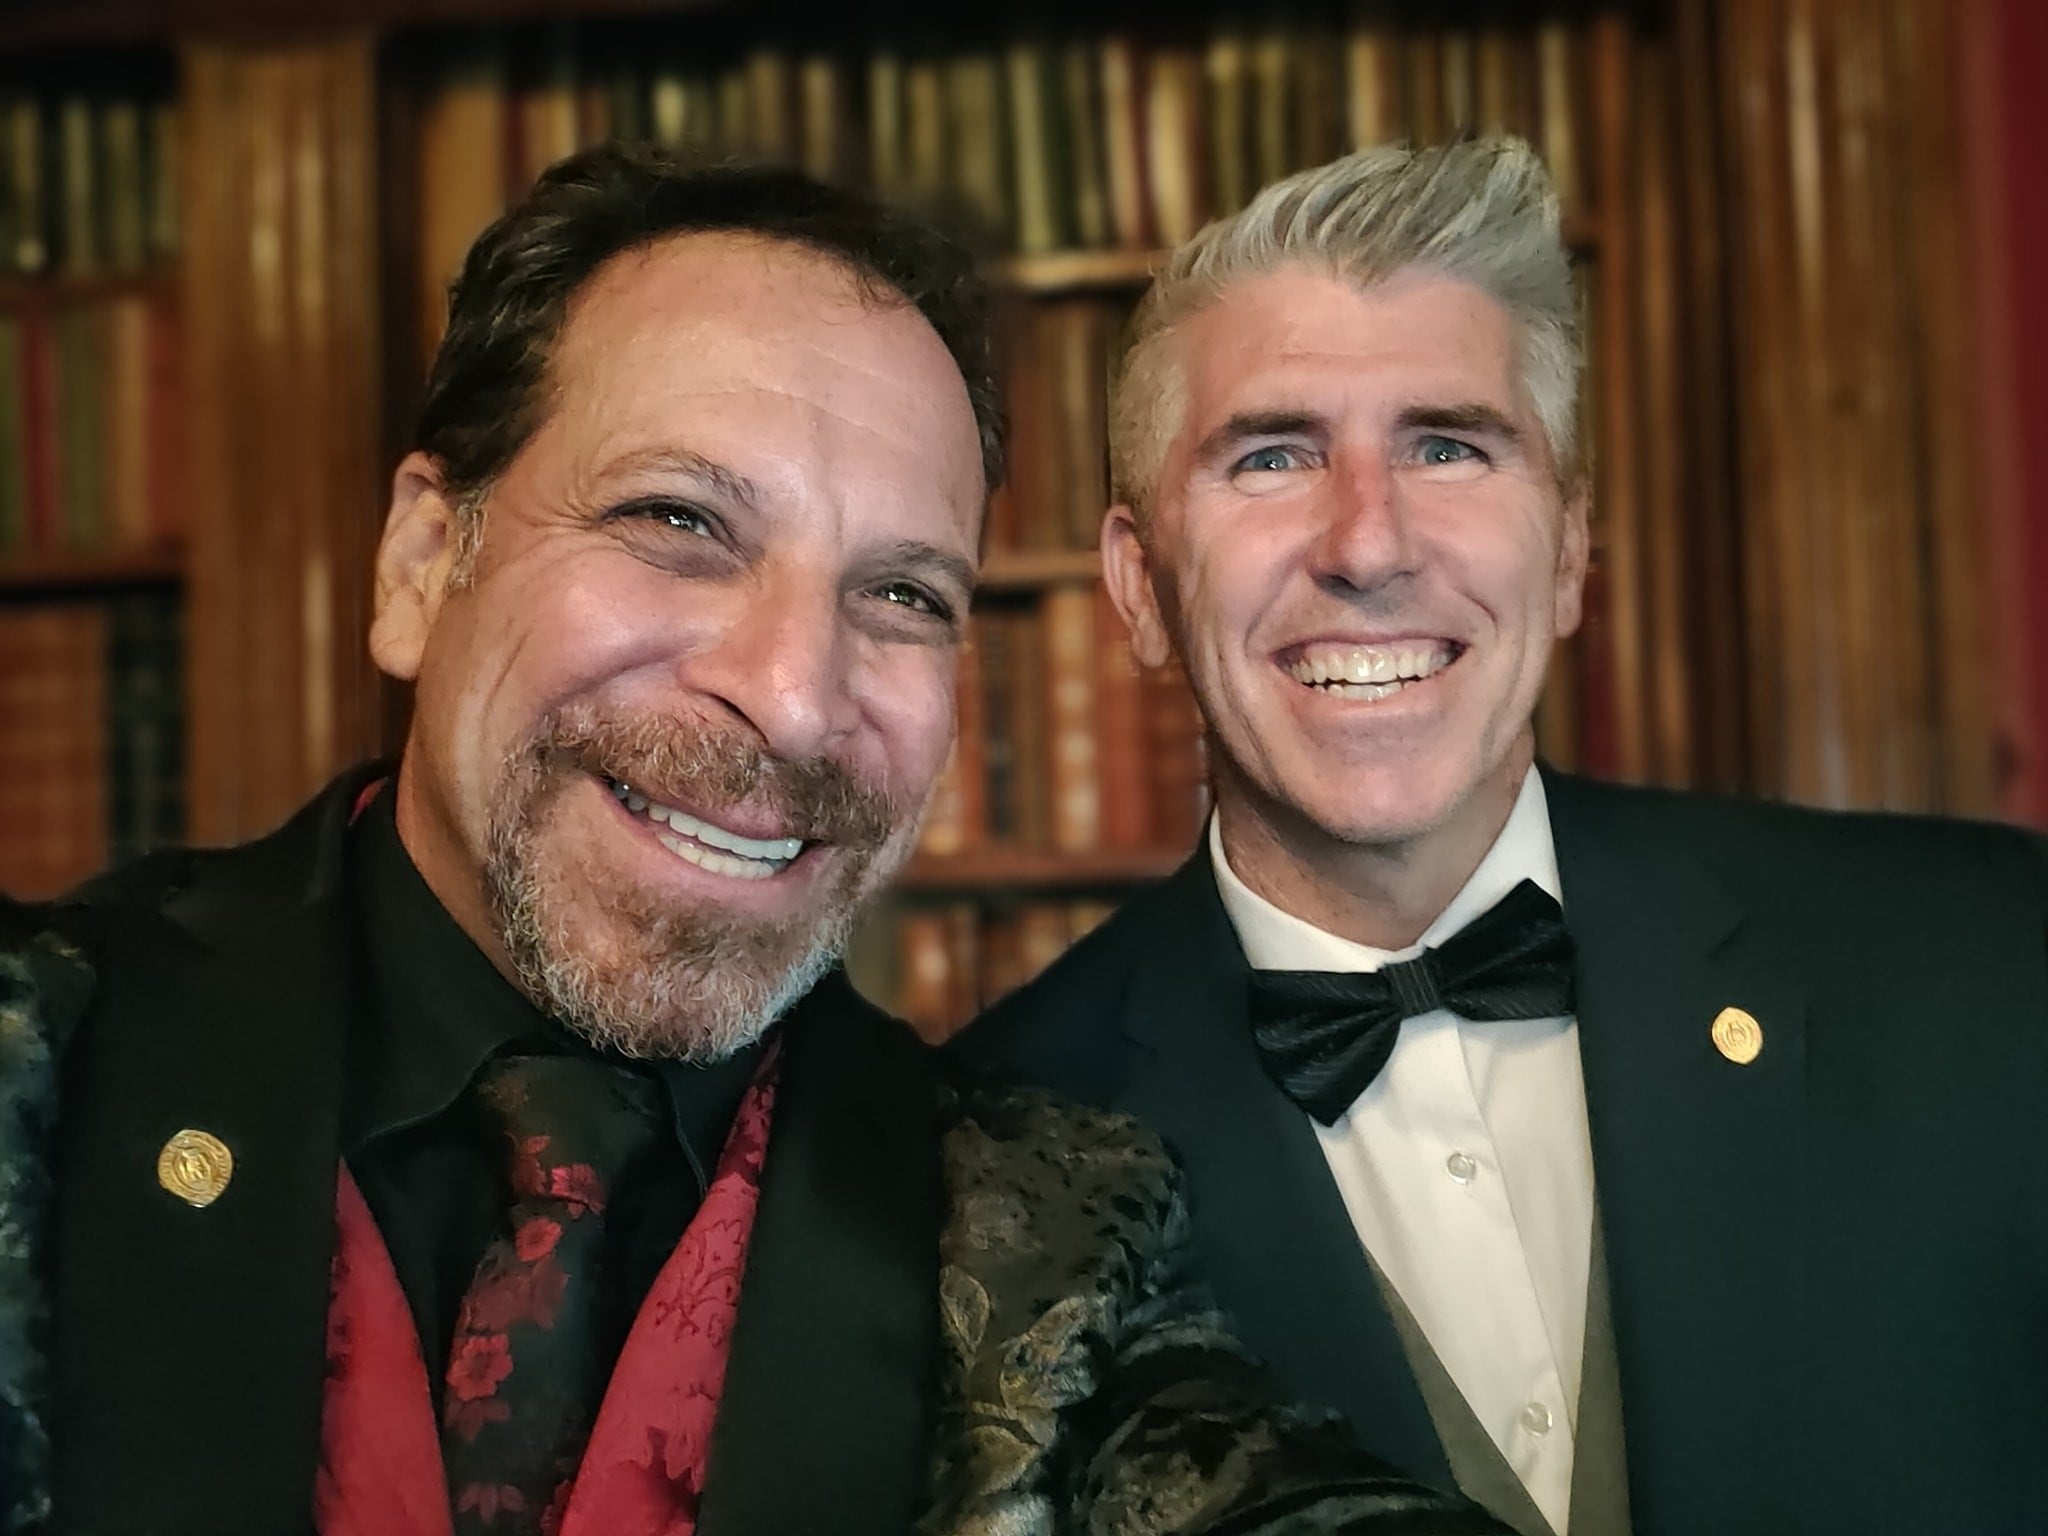 Sharpo posing with celebrity Magician Danny Ray (Penn and Teller fooler!)